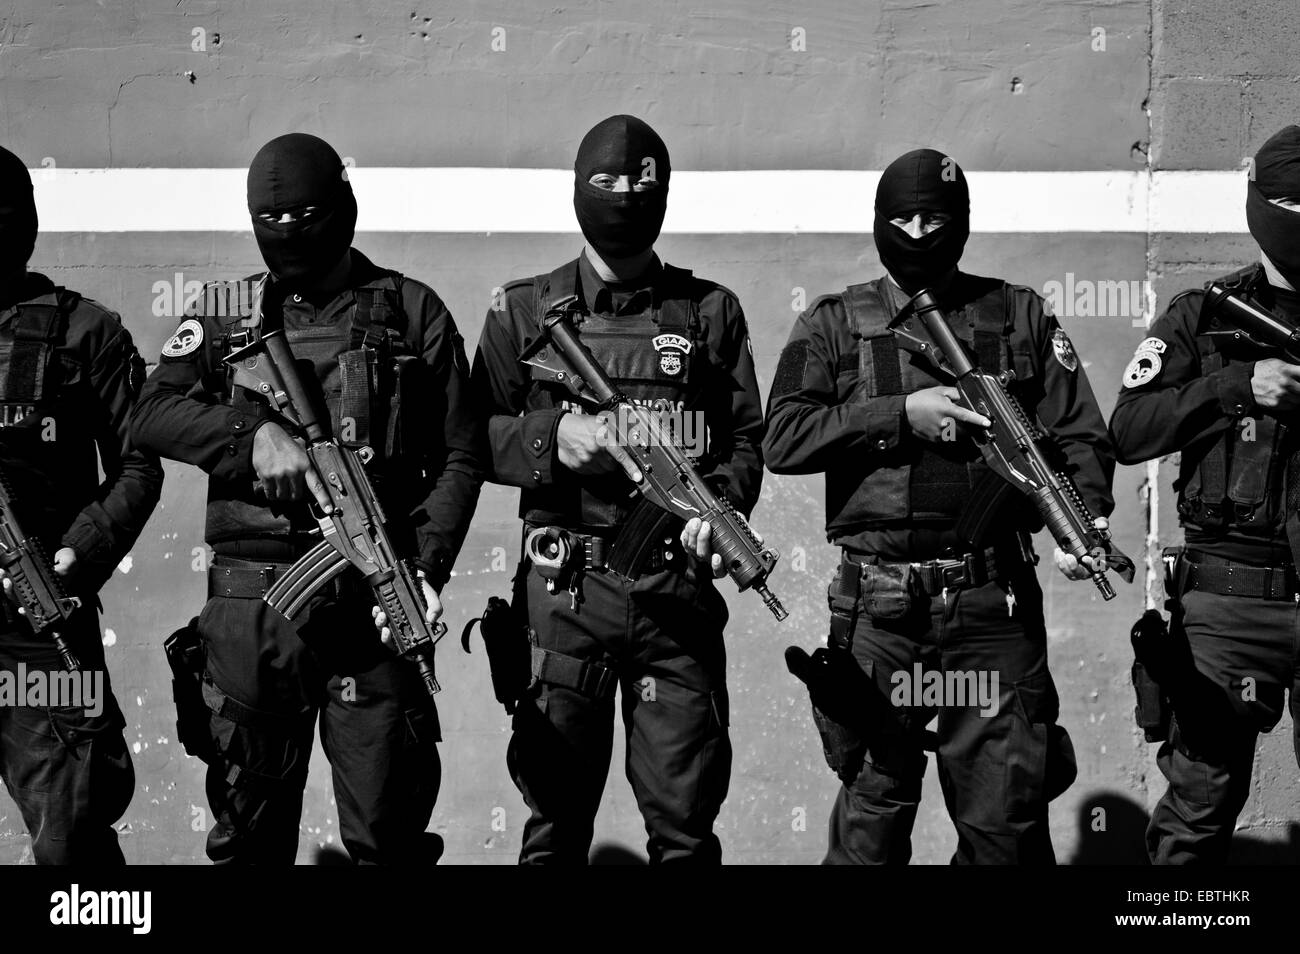 Salvadorean policemen, members of the specialized anti-gang unit (Unidad Antipandillas), receive an order on the police base before leaving for an operation in San Salvador, El Salvador, 19 December 2013. Stock Photo